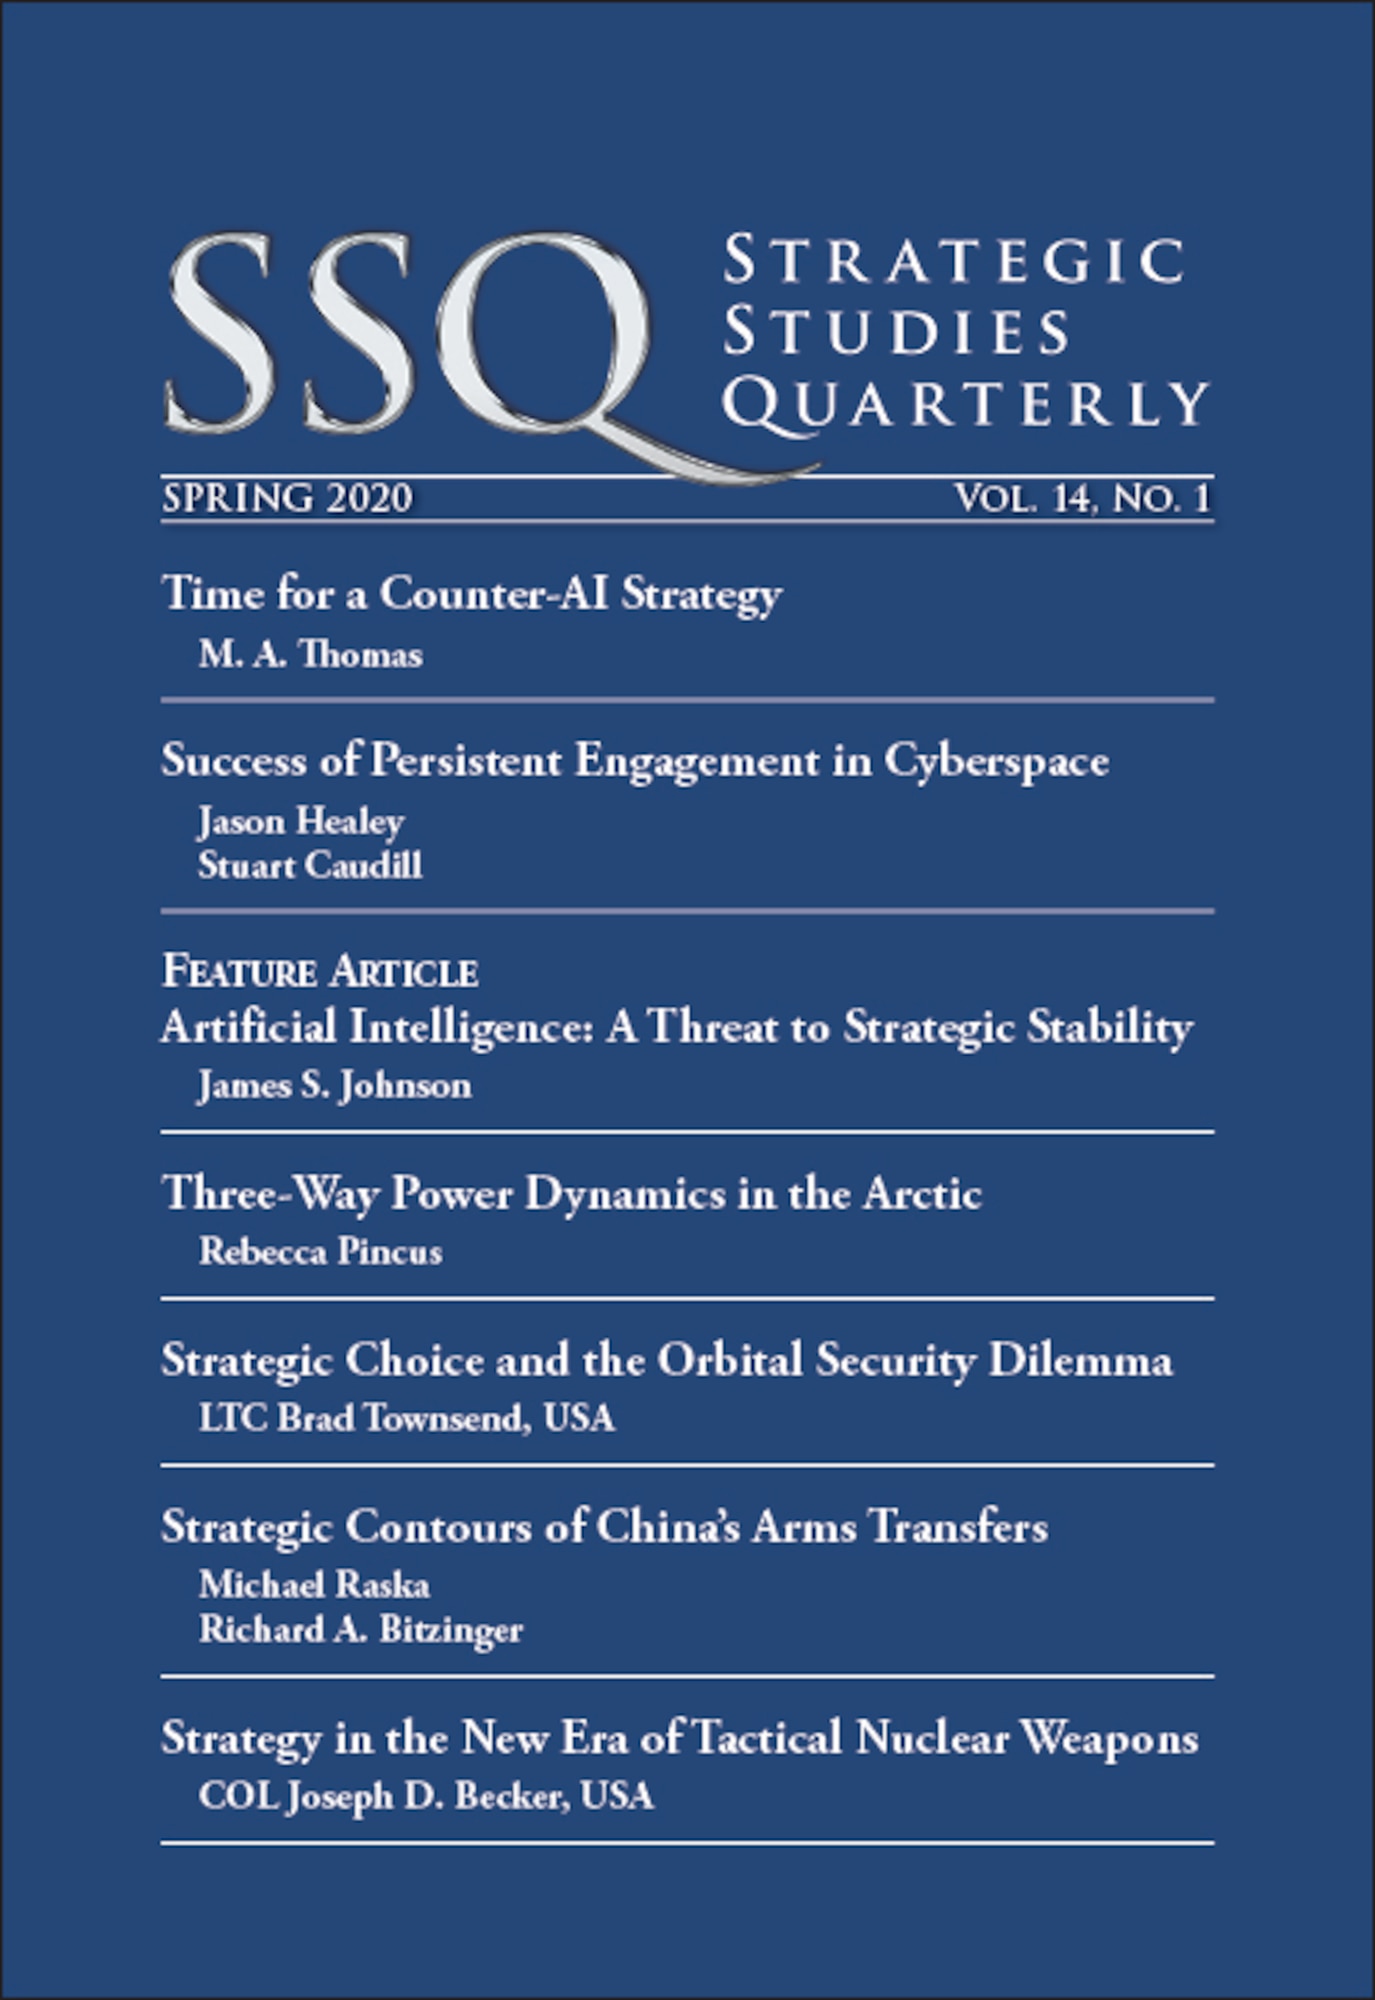 Air University Press releases spring 2020 edition of SSQ. ( Courtesy Graphic)